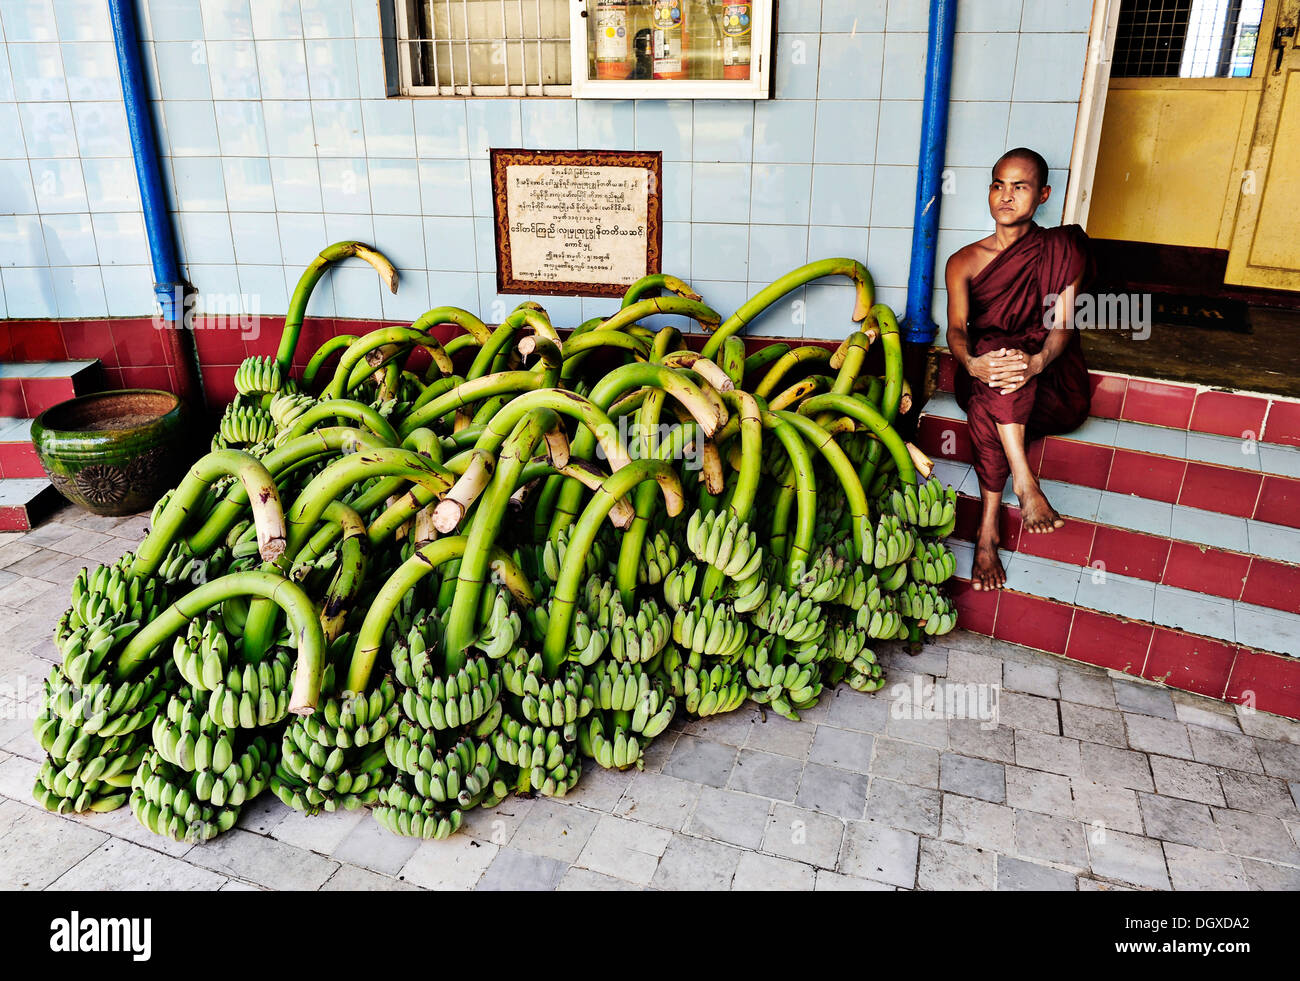 Monk sitting next to a many bunches of bananas in a monastery in Yangon, Myanmar, Burma, Southeast Asia, Asia Stock Photo